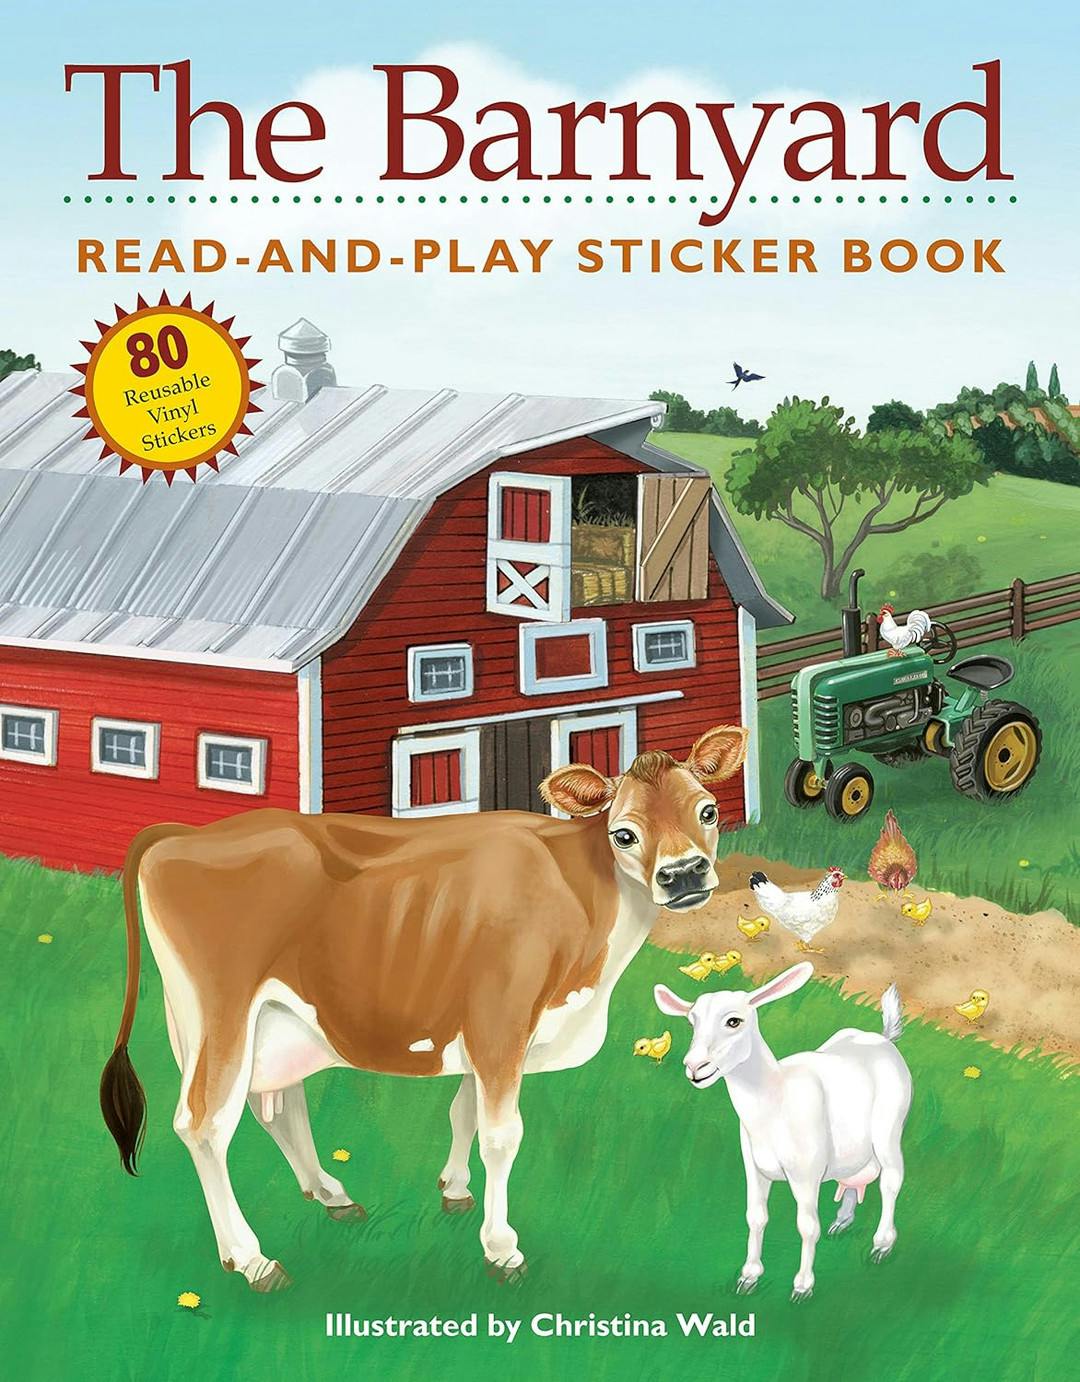 The Barnyard Read-and-Play Sticker Book